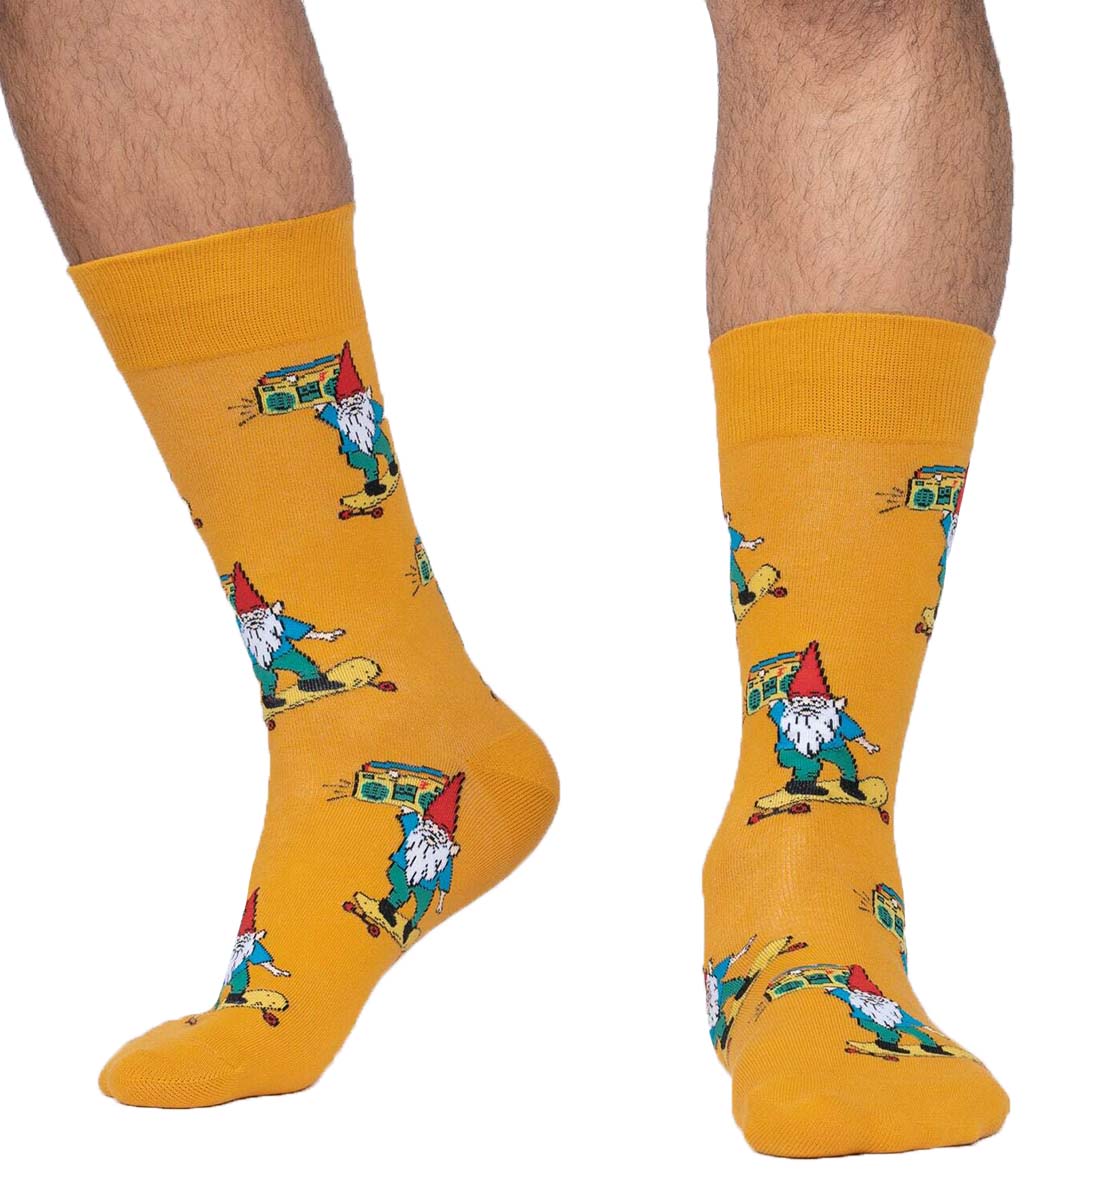 SOCK it to me Men's Crew Socks (mef0488),Gnarly Gnome - Gnarly Gnome,One Size